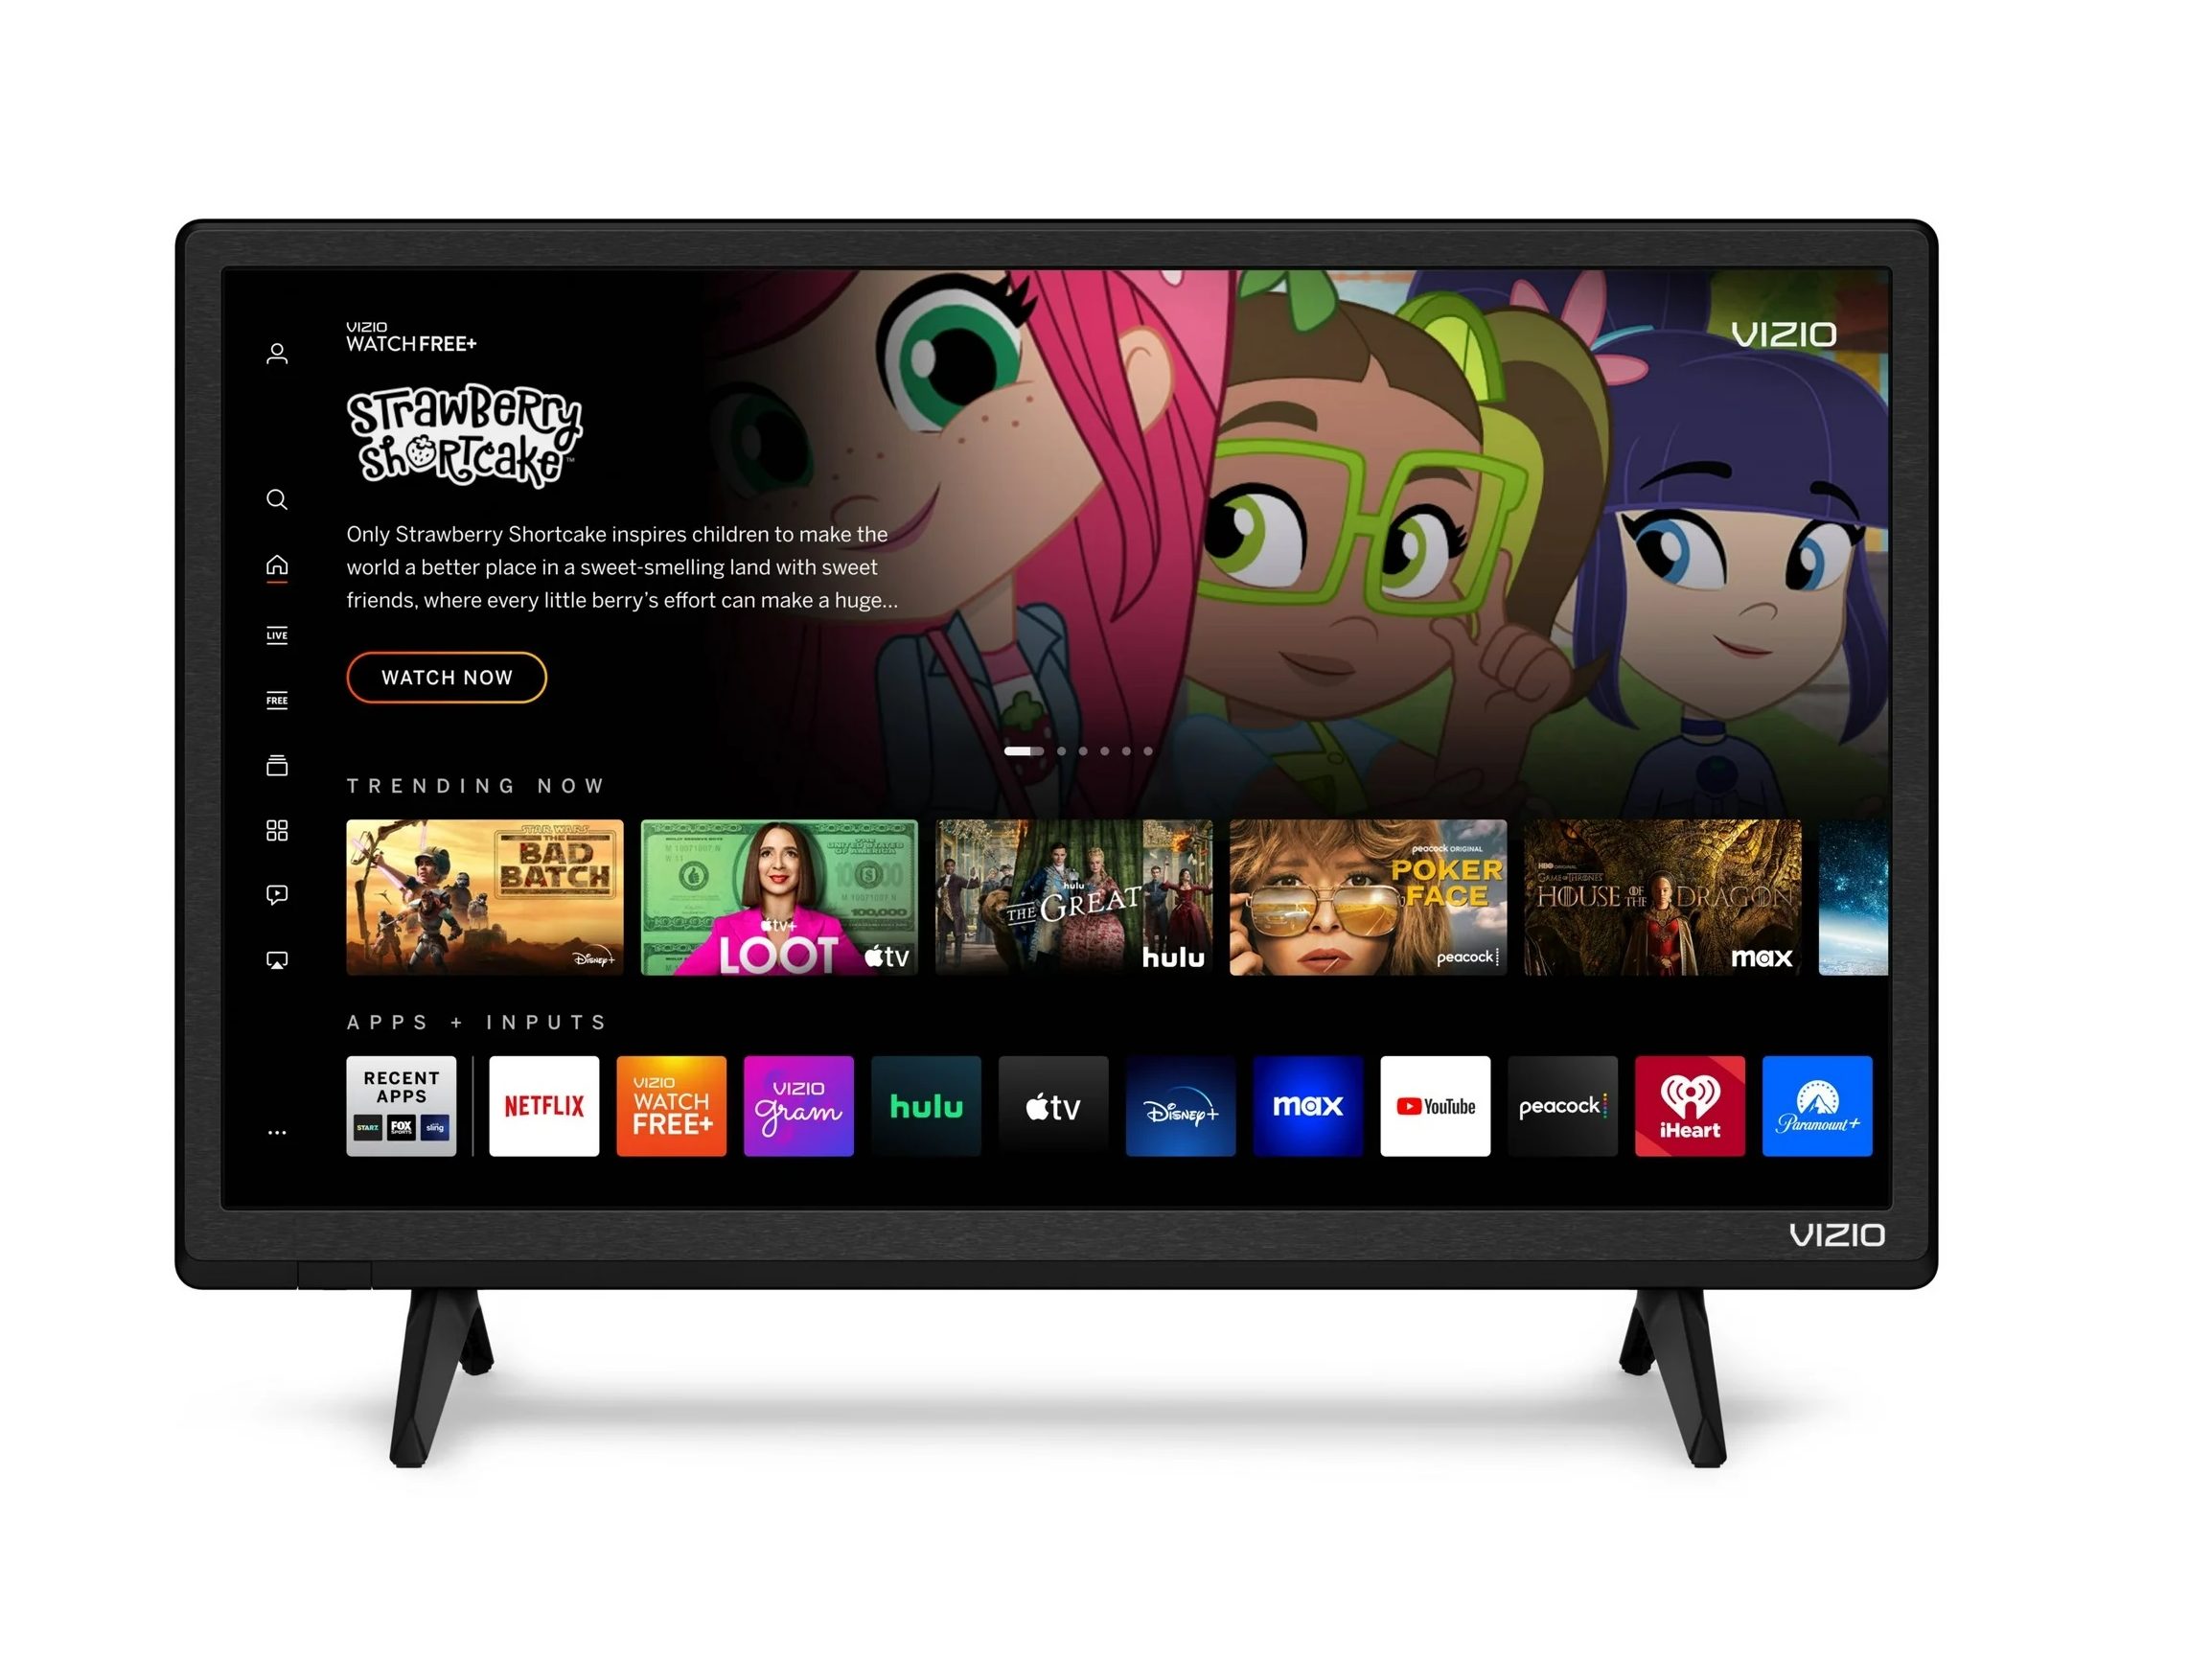 A Vizio 24-inch Class D-Series FHD LED Smart TV with a childrens' television program being displayed.